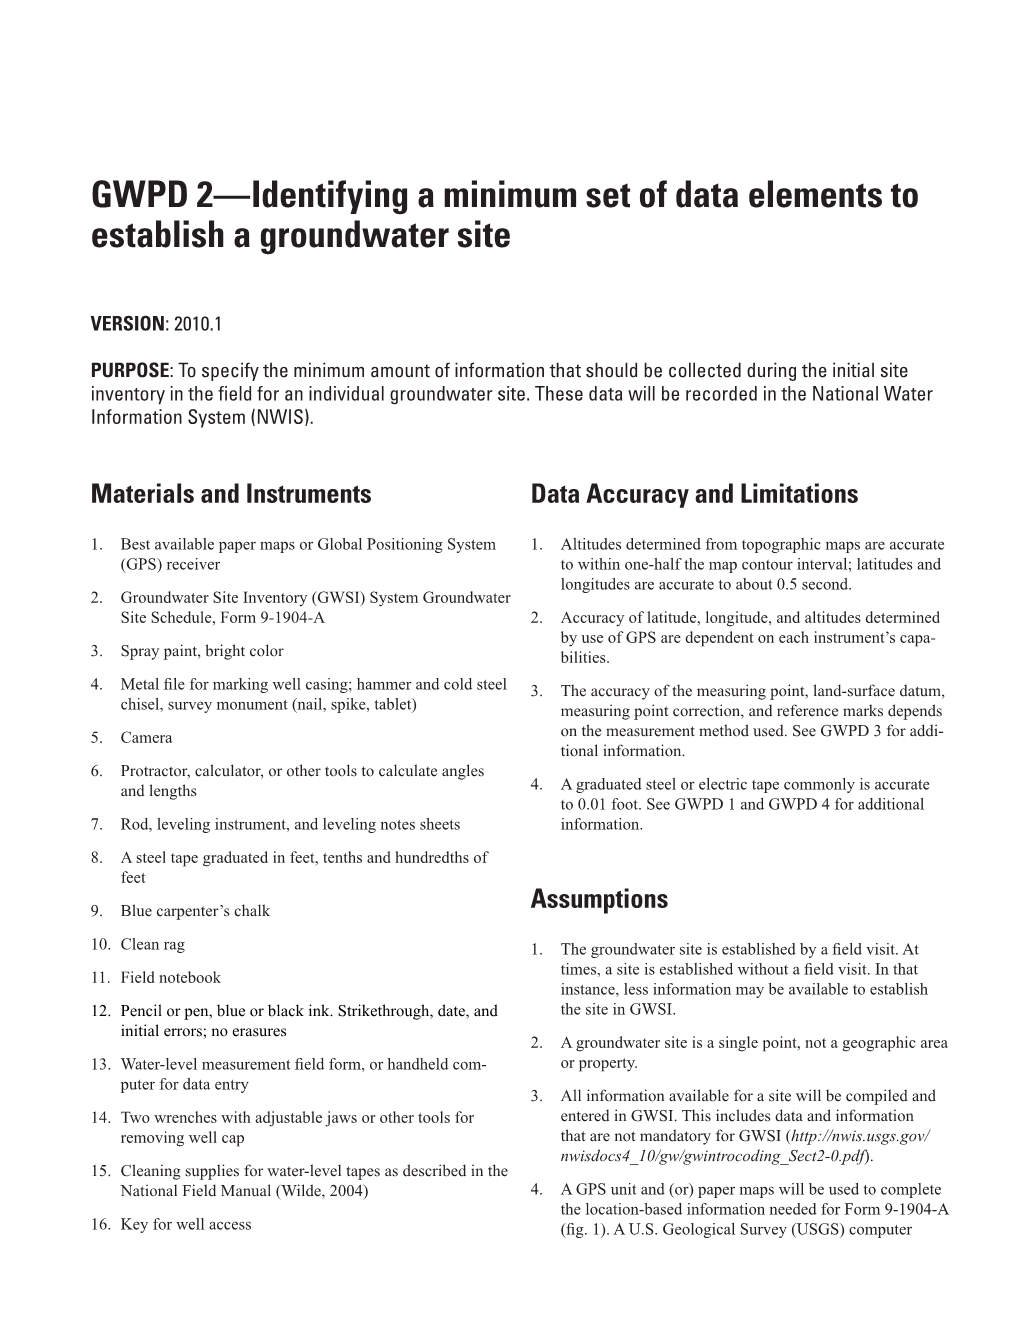 GWPD 2—Identifying a Minimum Set of Data Elements to Establish a Groundwater Site